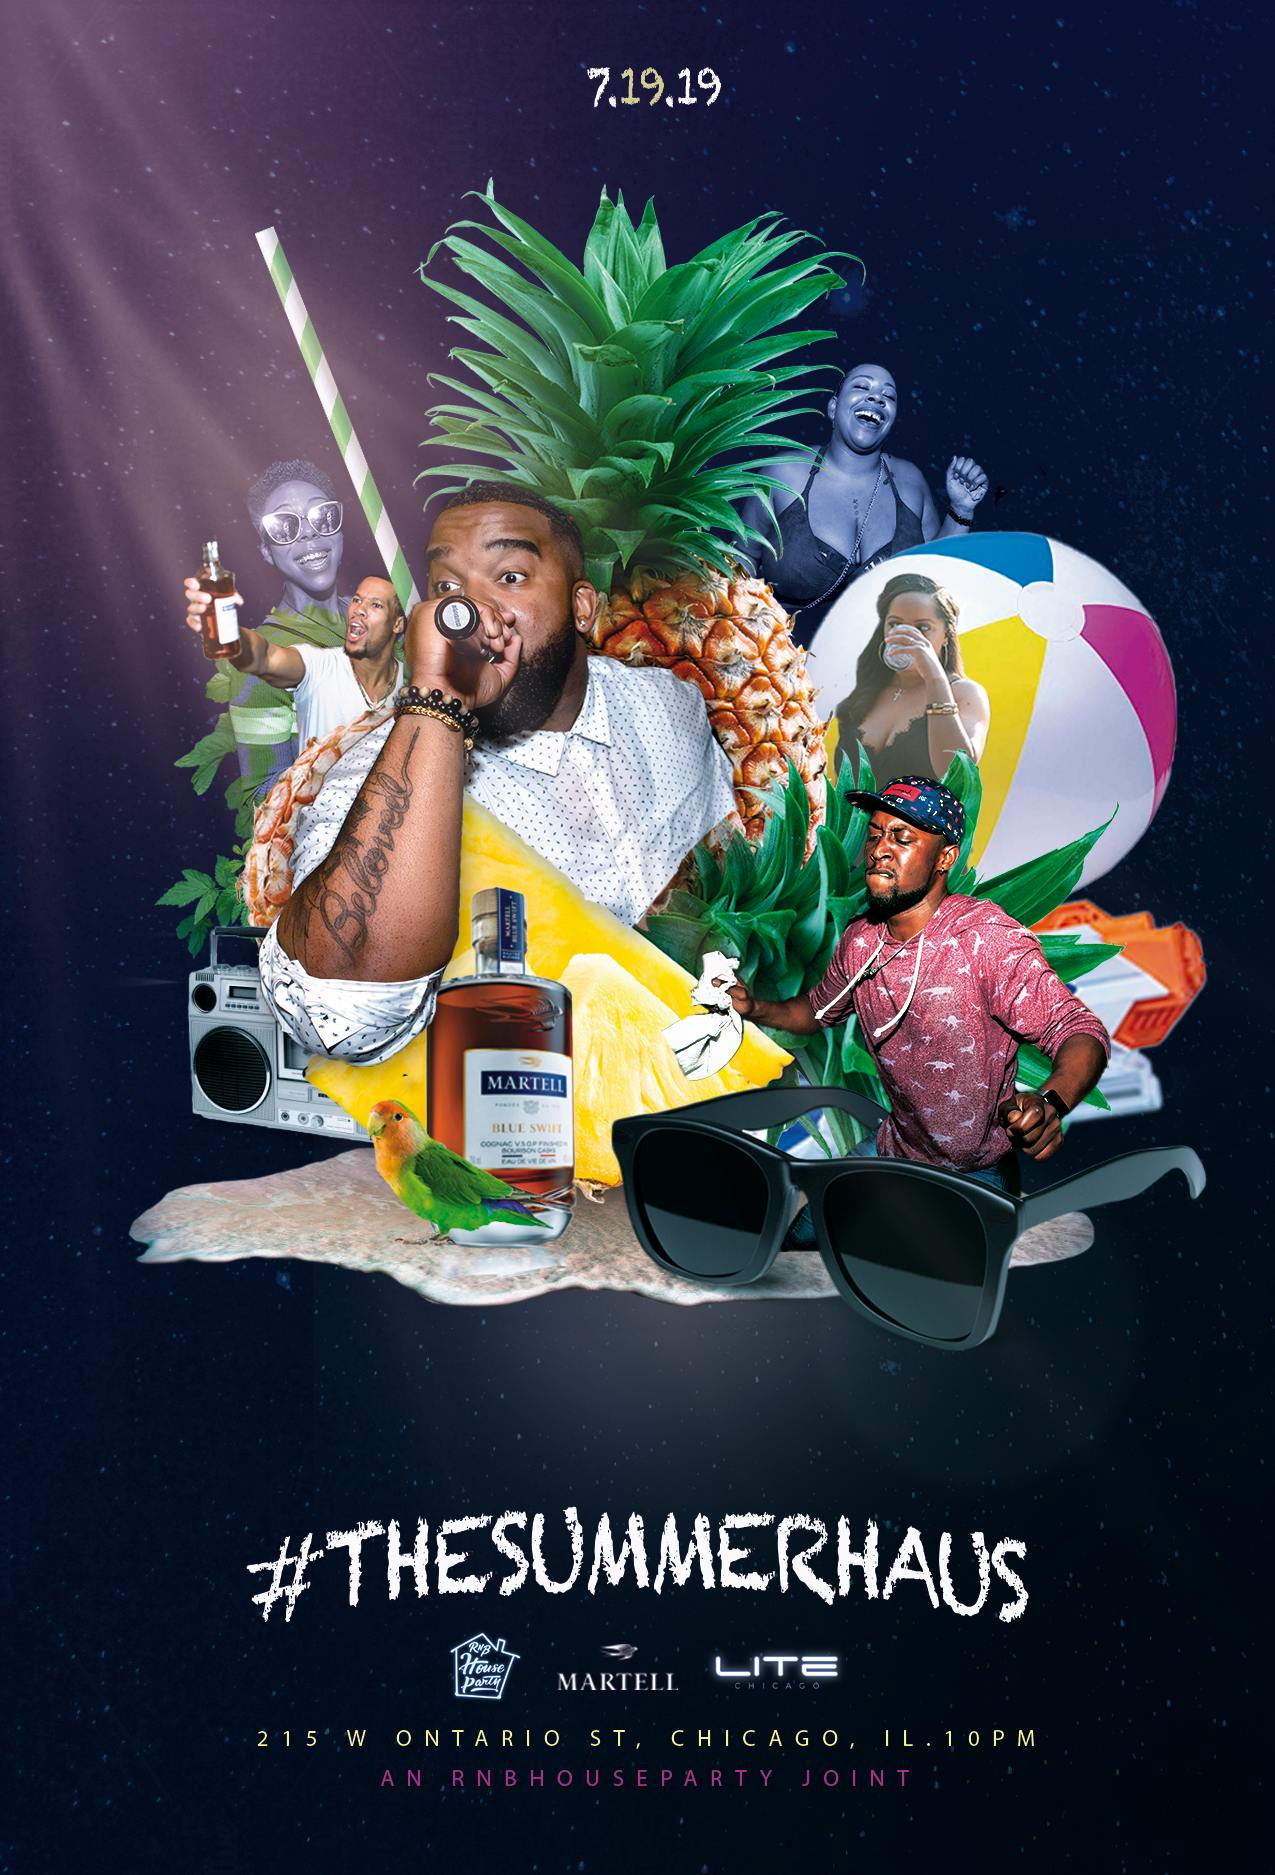 The SummerHaus Chi Presented by Martell